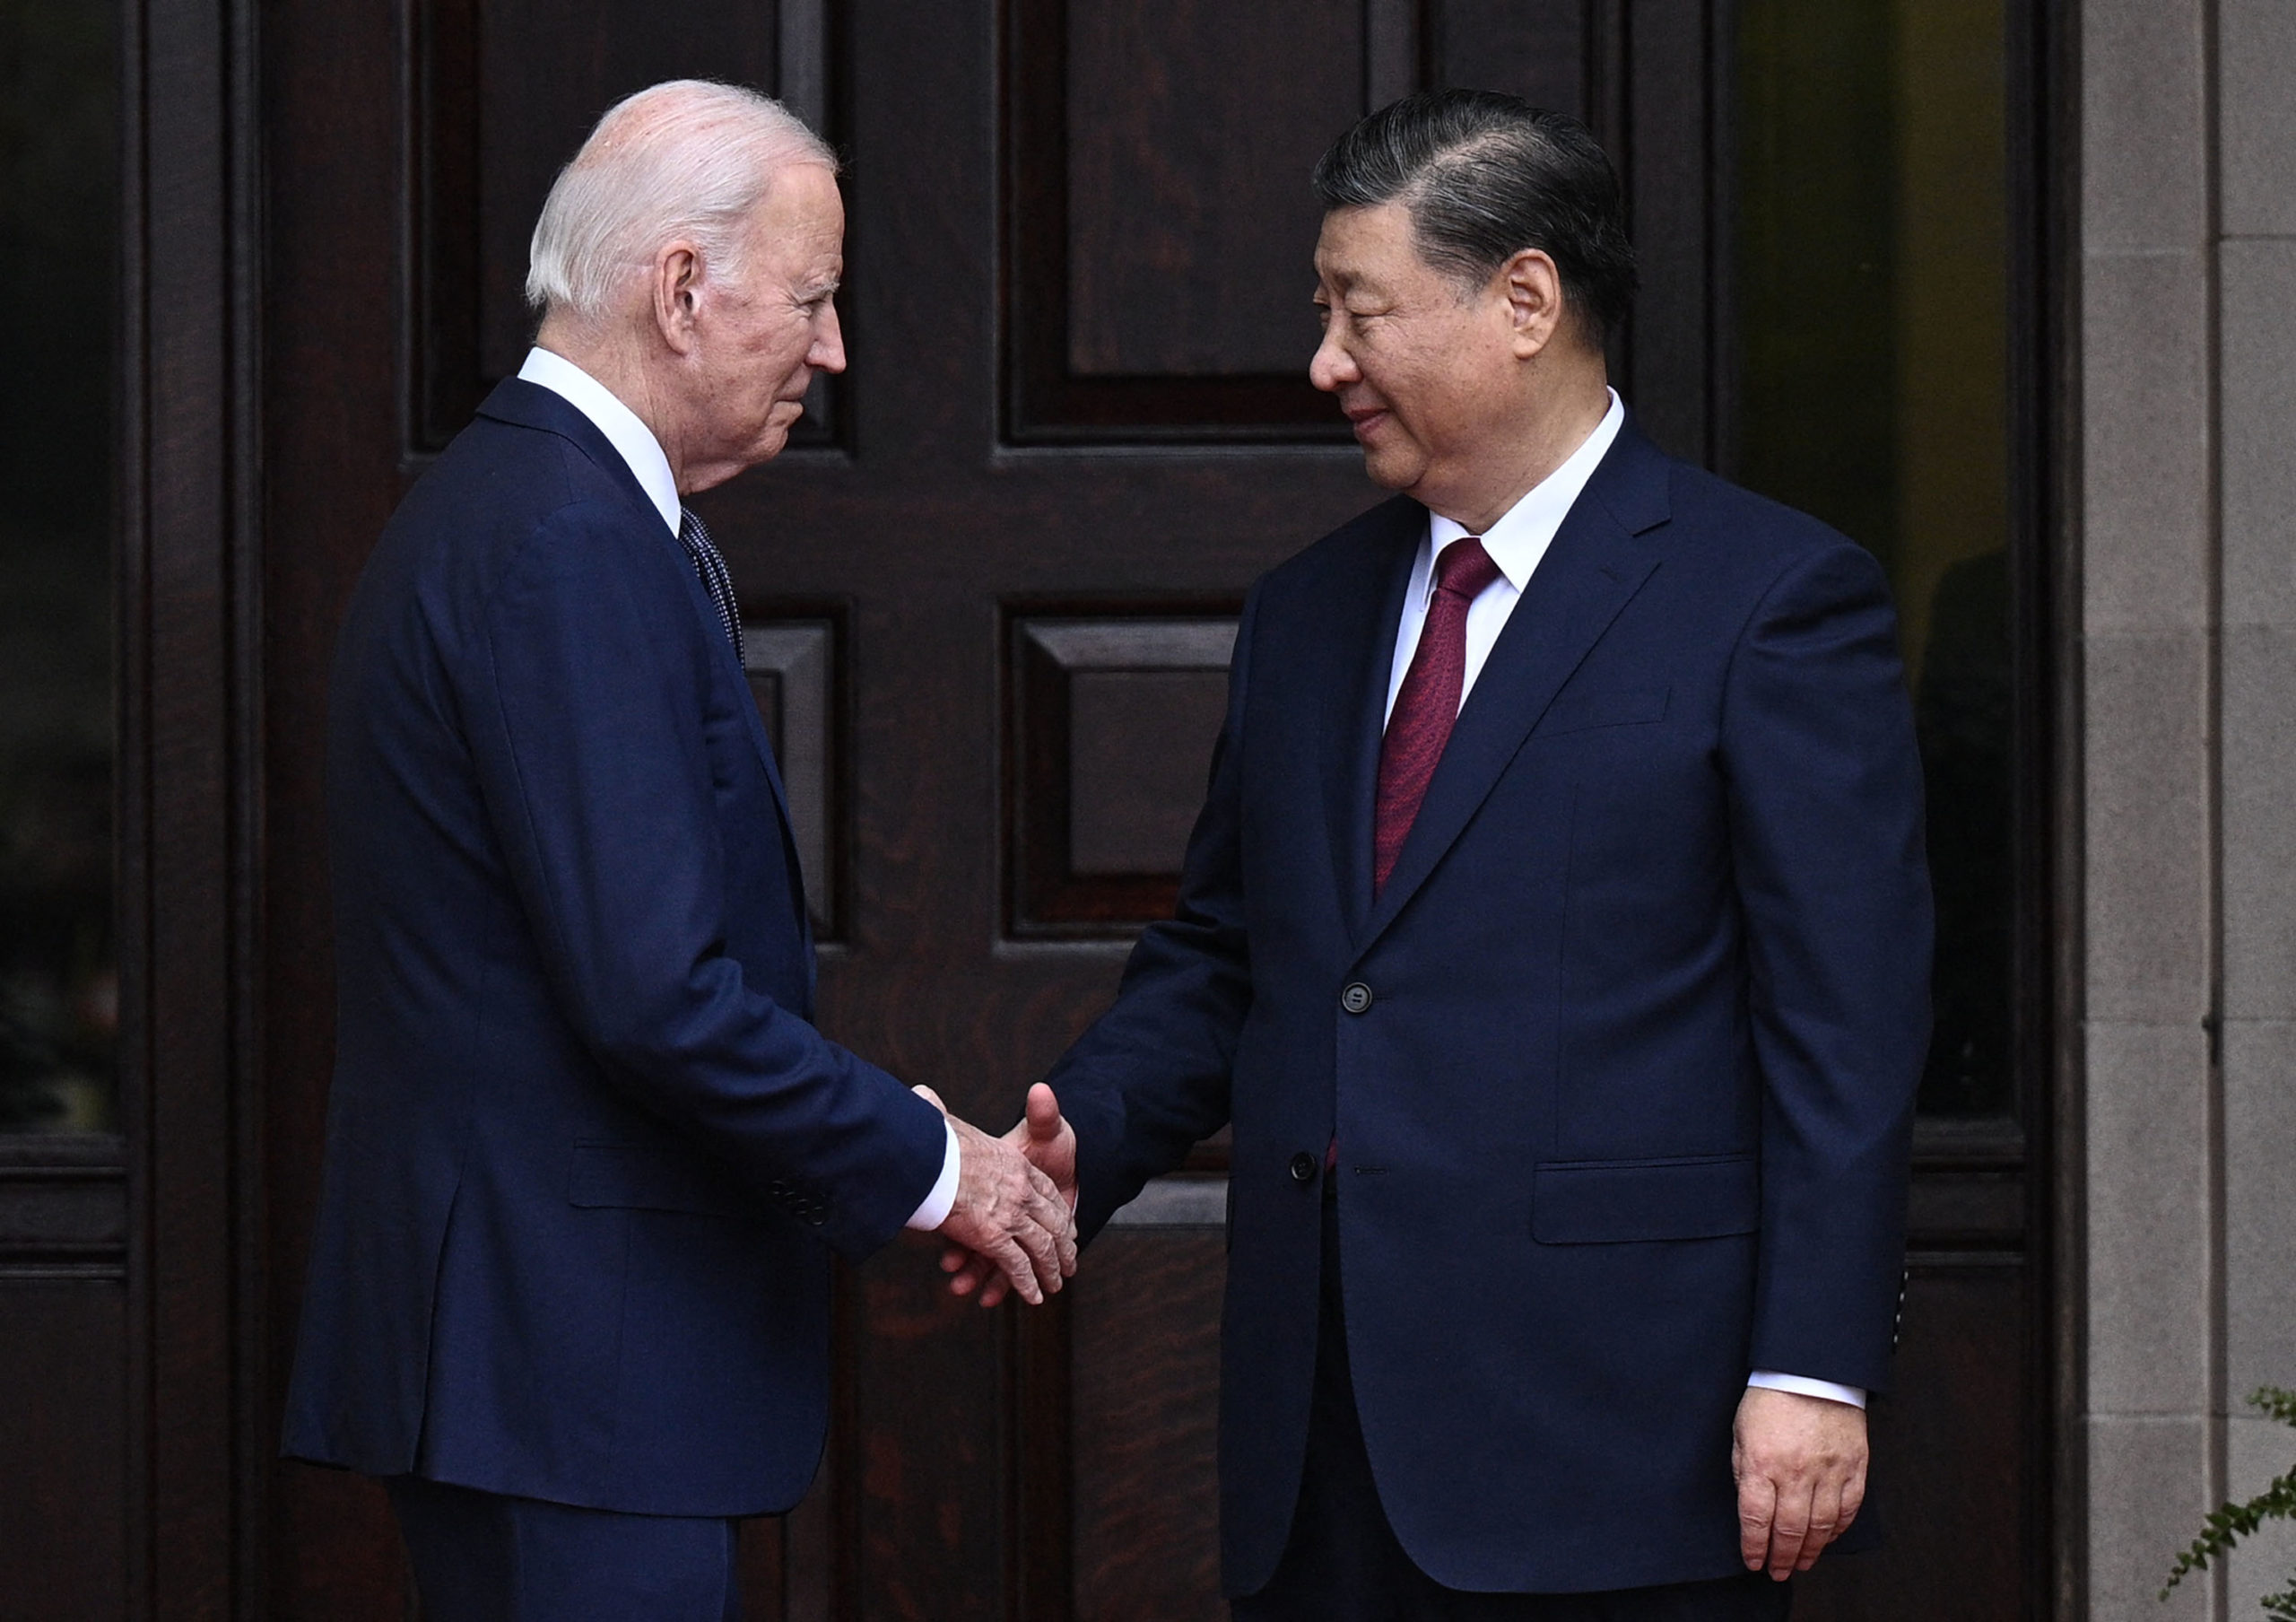 US President Joe Biden greets Chinese President Xi Jinping before a meeting during the Asia-Pacific Economic Cooperation (APEC) Leaders' week in Woodside, California on November 15, 2023. Biden and Xi will try to prevent the superpowers' rivalry spilling into conflict when they meet for the first time in a year at a high-stakes summit in San Francisco on Wednesday. With tensions soaring over issues including Taiwan, sanctions and trade, the leaders of the world's largest economies are expected to hold at least three hours of talks at the Filoli country estate on the city's outskirts. (Photo by Brendan SMIALOWSKI / AFP) (Photo by BRENDAN SMIALOWSKI/AFP via Getty Images)